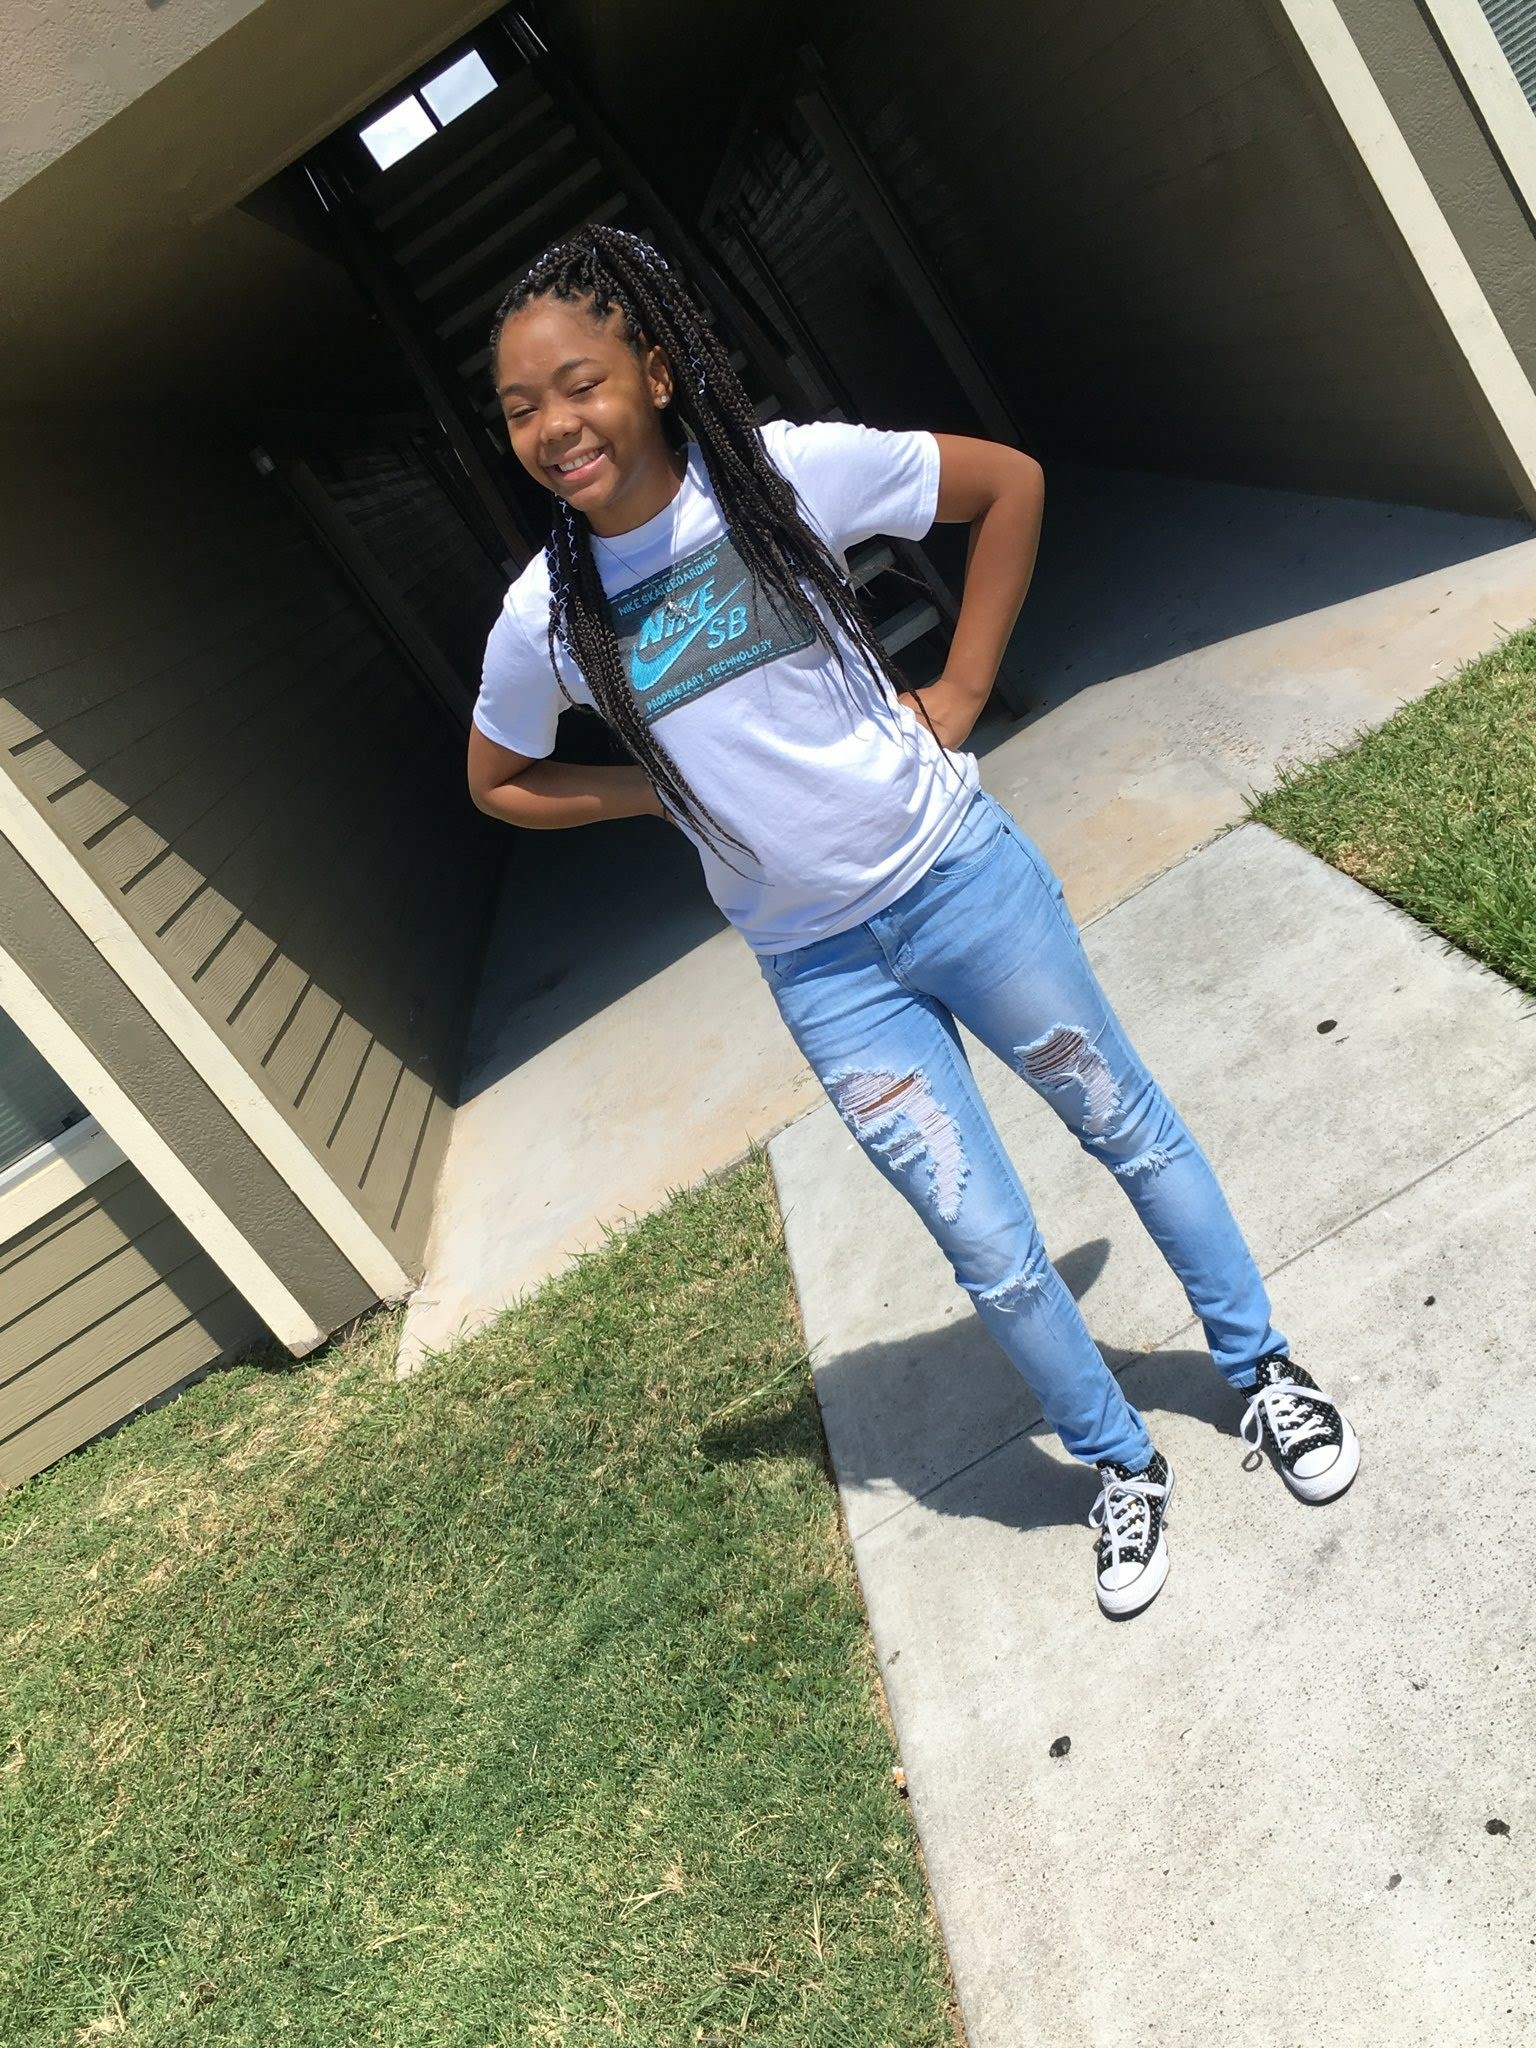 PHOTO: Kashala Francis, 13, of Houston, shown in this undated photo, slipped into a coma just days after she was jumped by a group of girls and kicked in the head while walking home from school.